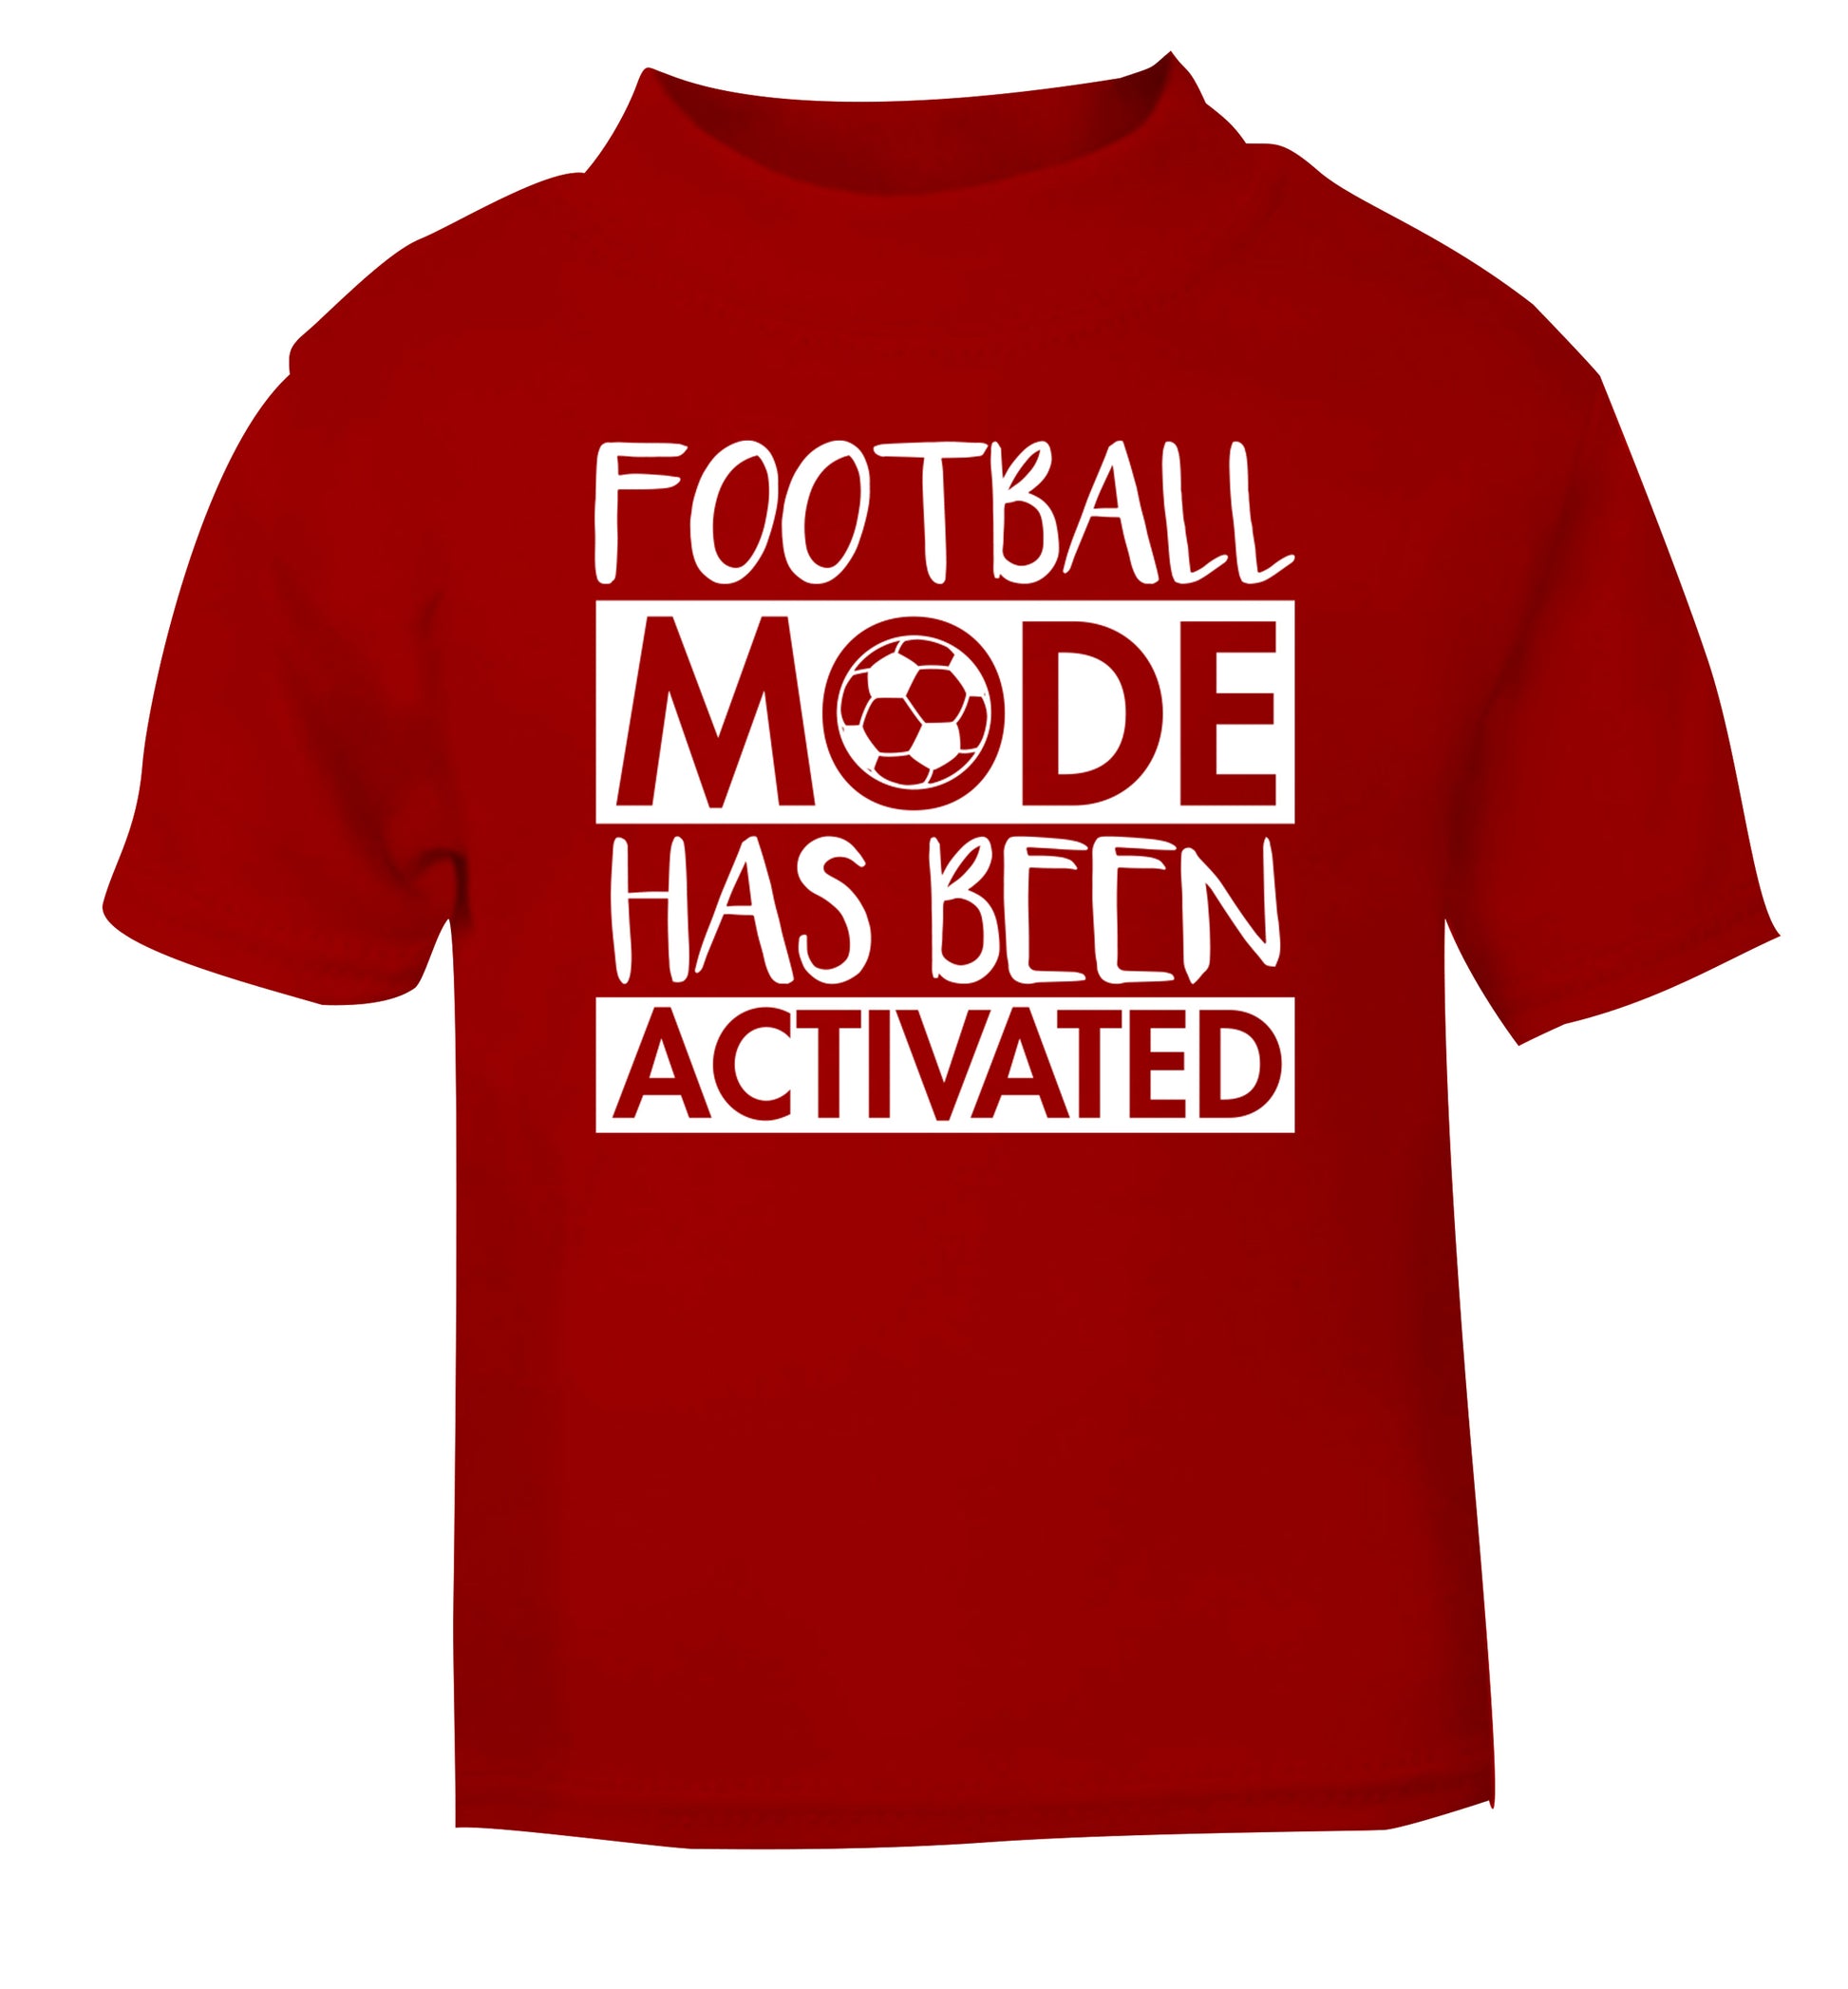 Football mode has been activated red Baby Toddler Tshirt 2 Years